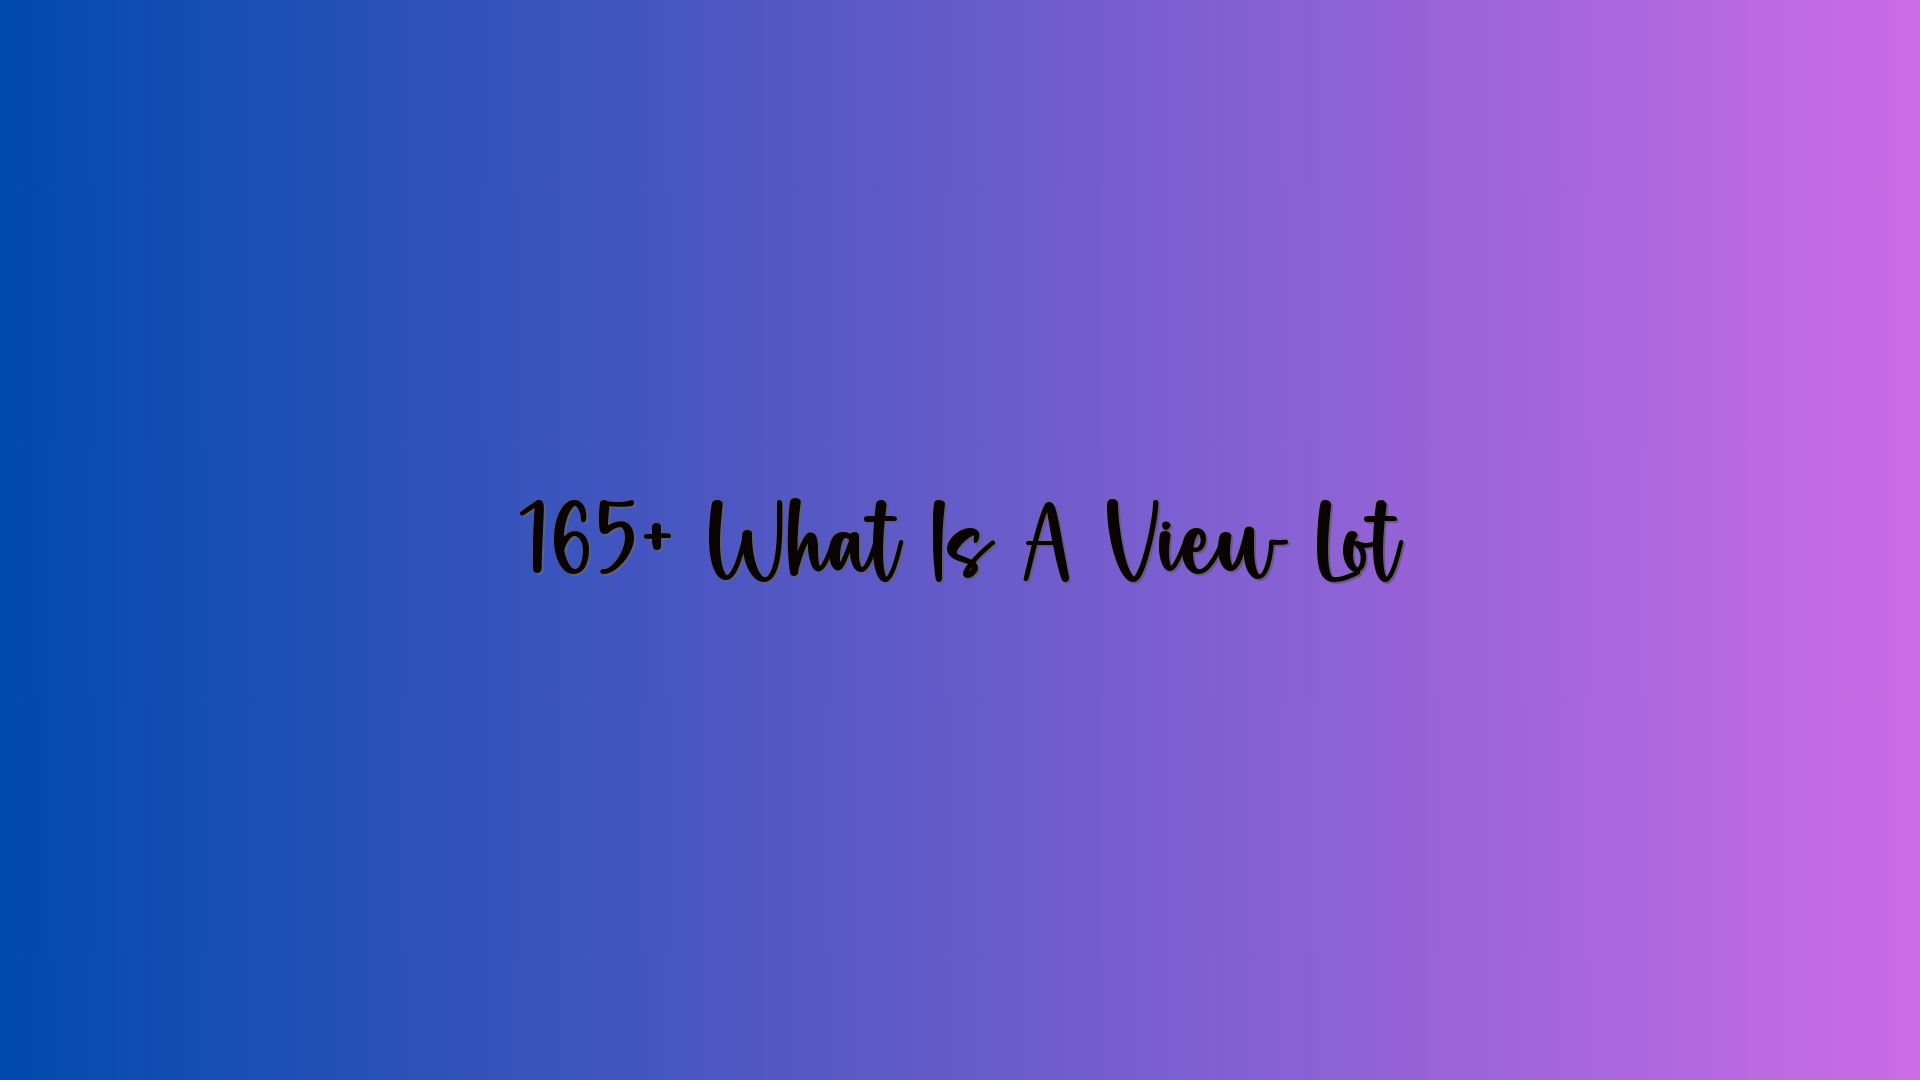 165+ What Is A View Lot